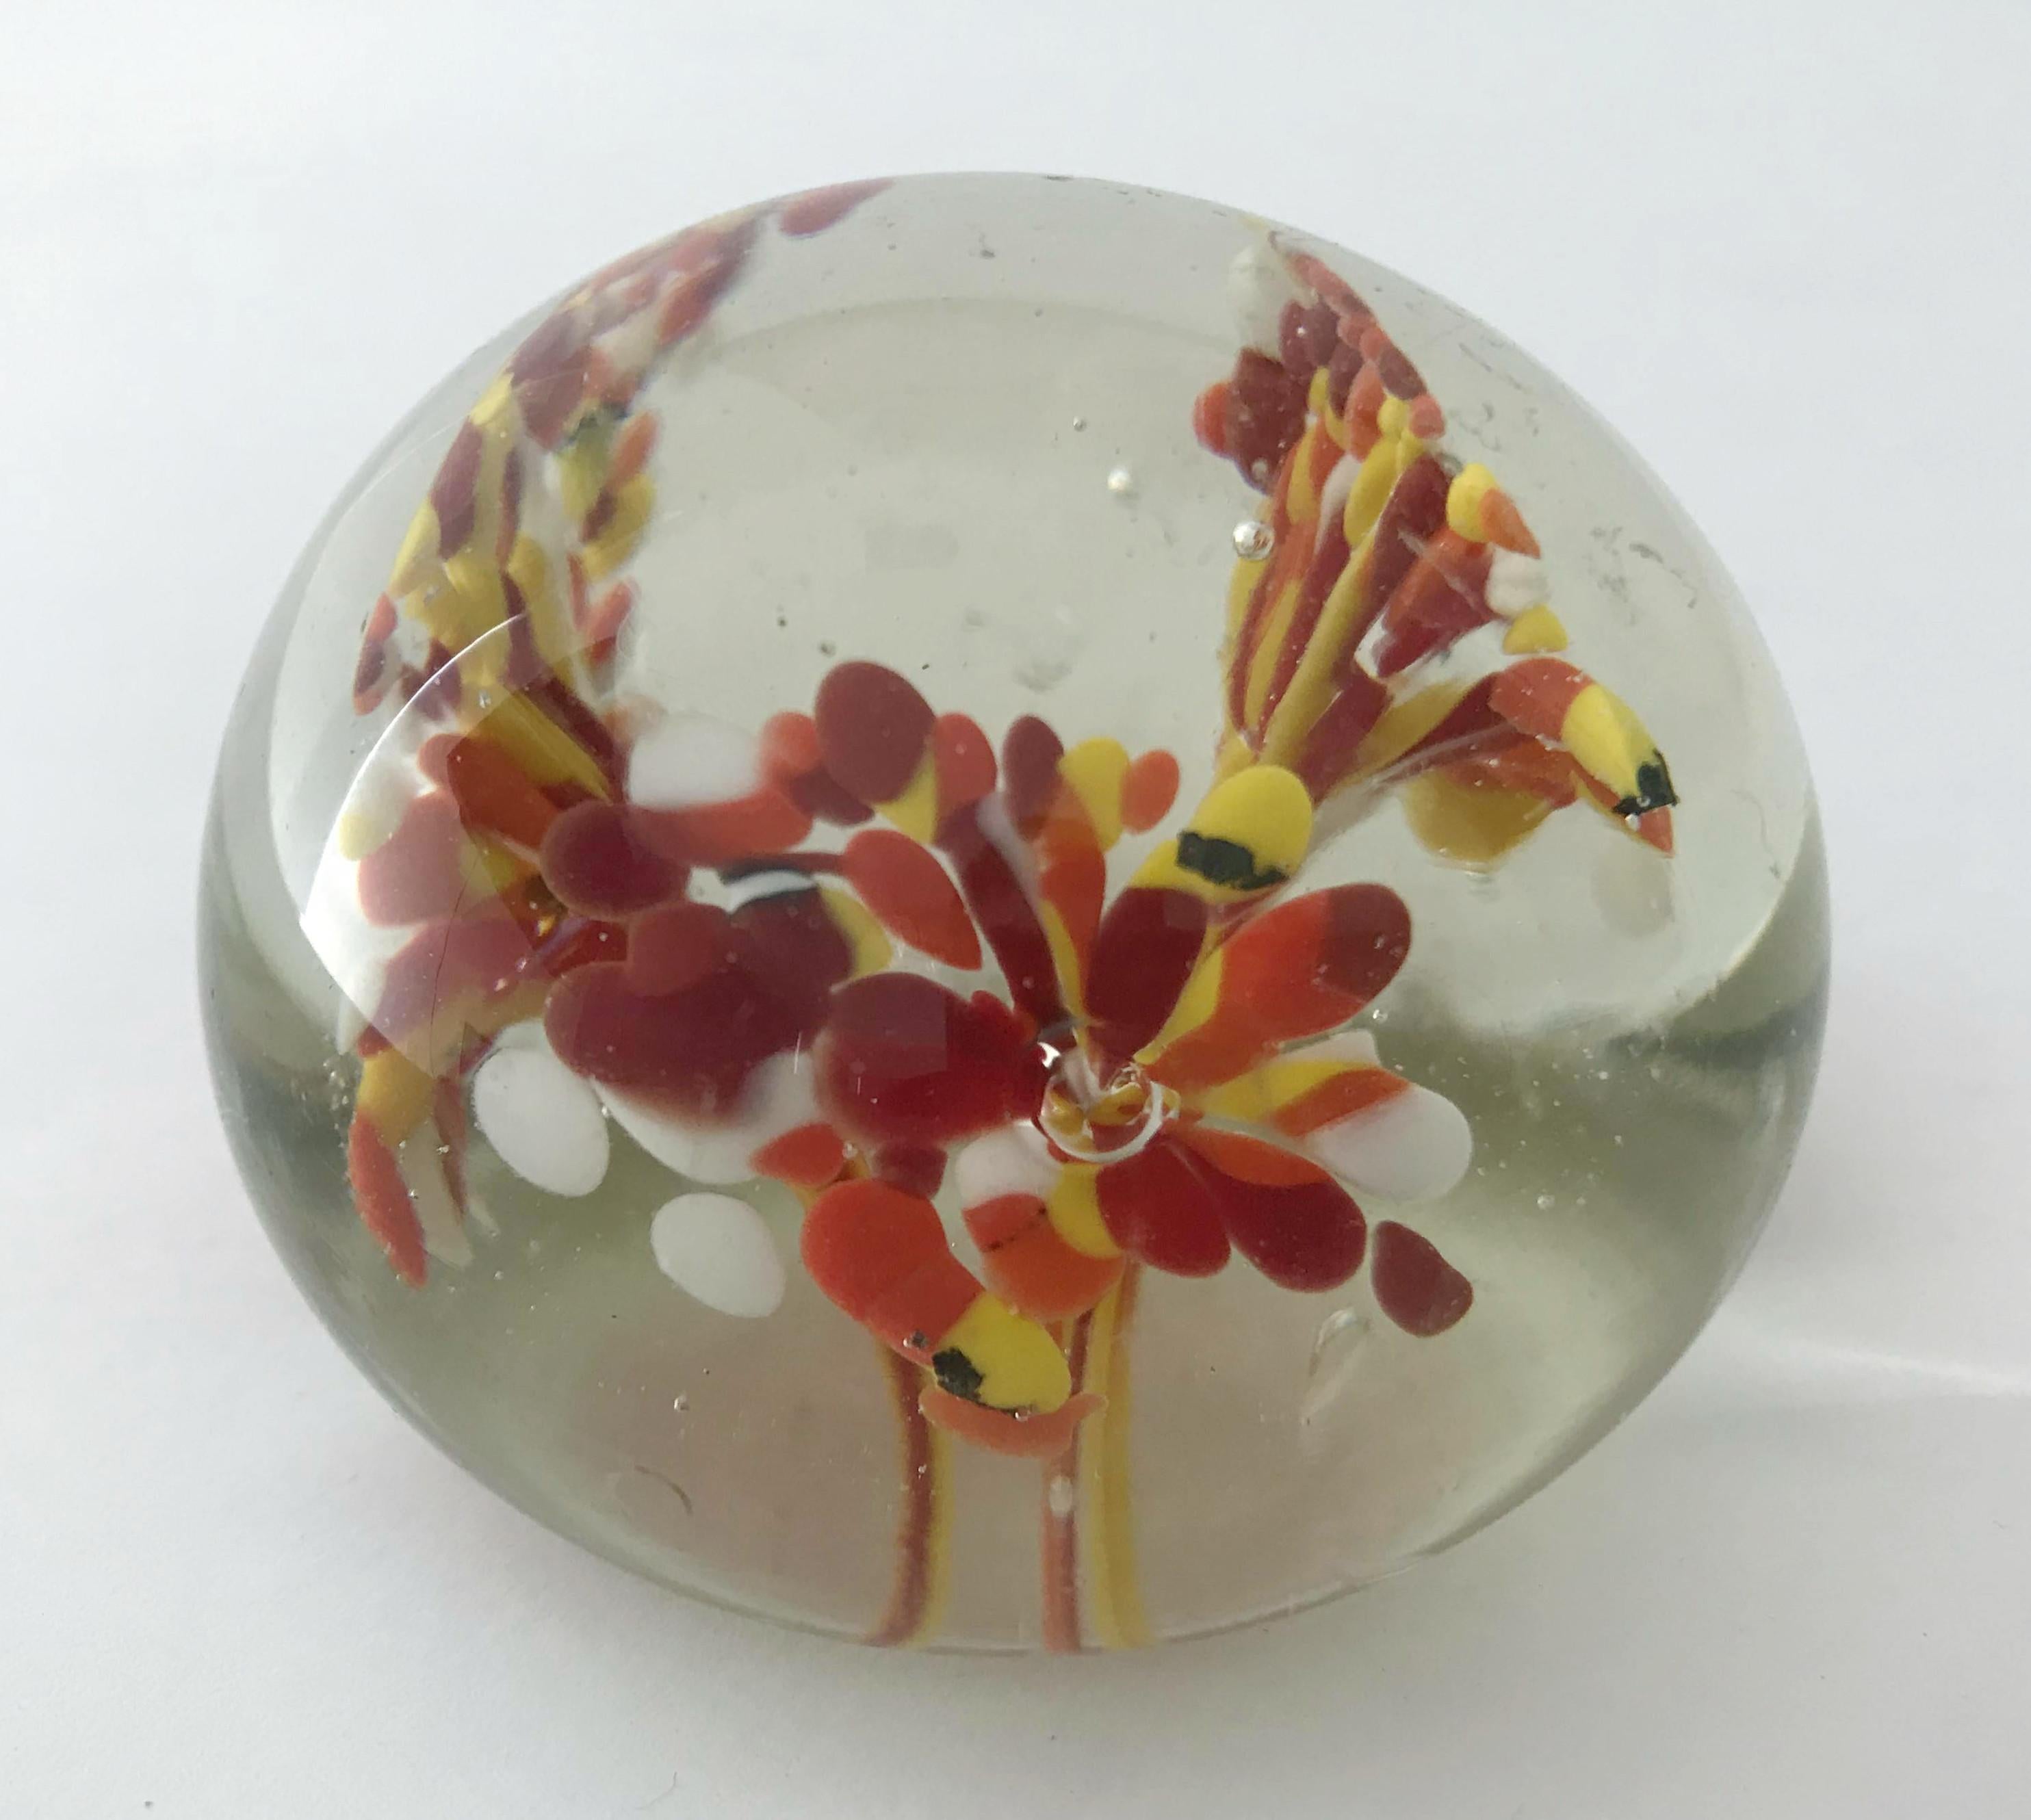 Vintage Italian Murano glass paperweight hand blown with three flowers inside / Made in Italy, circa 1960s
Measures: diameter 2.25 inches / height 1.25 inches
1 in stock in Palm Springs currently on HOLIDAY SALE for $149 !
Order reference #: